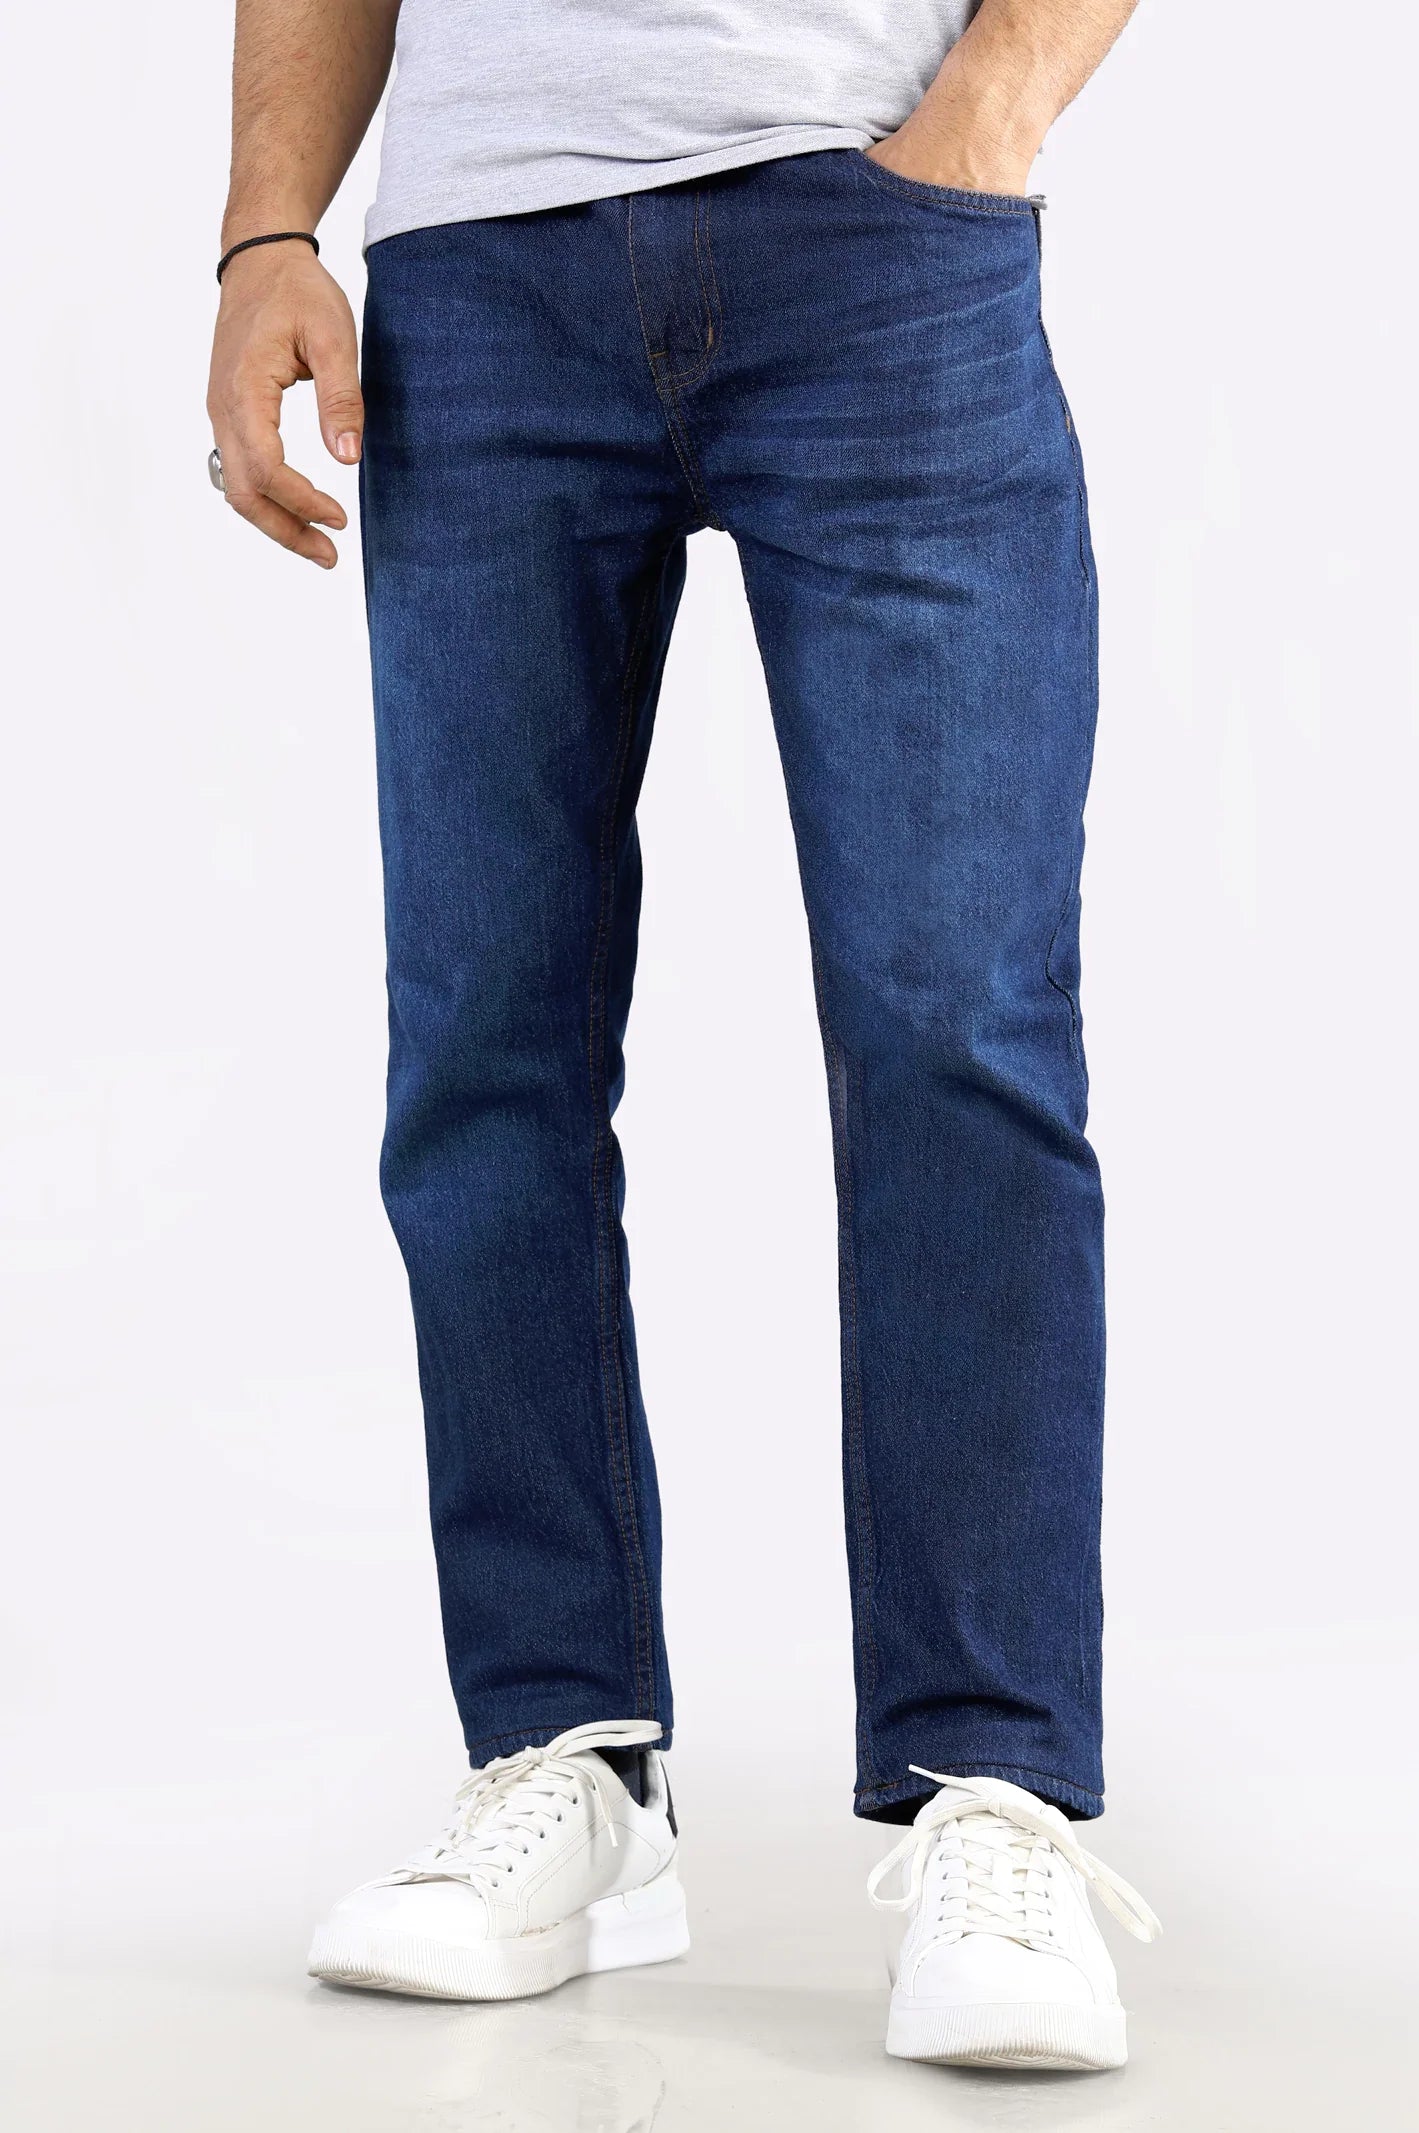 Dark Blue Smart Fit Jeans From Diners